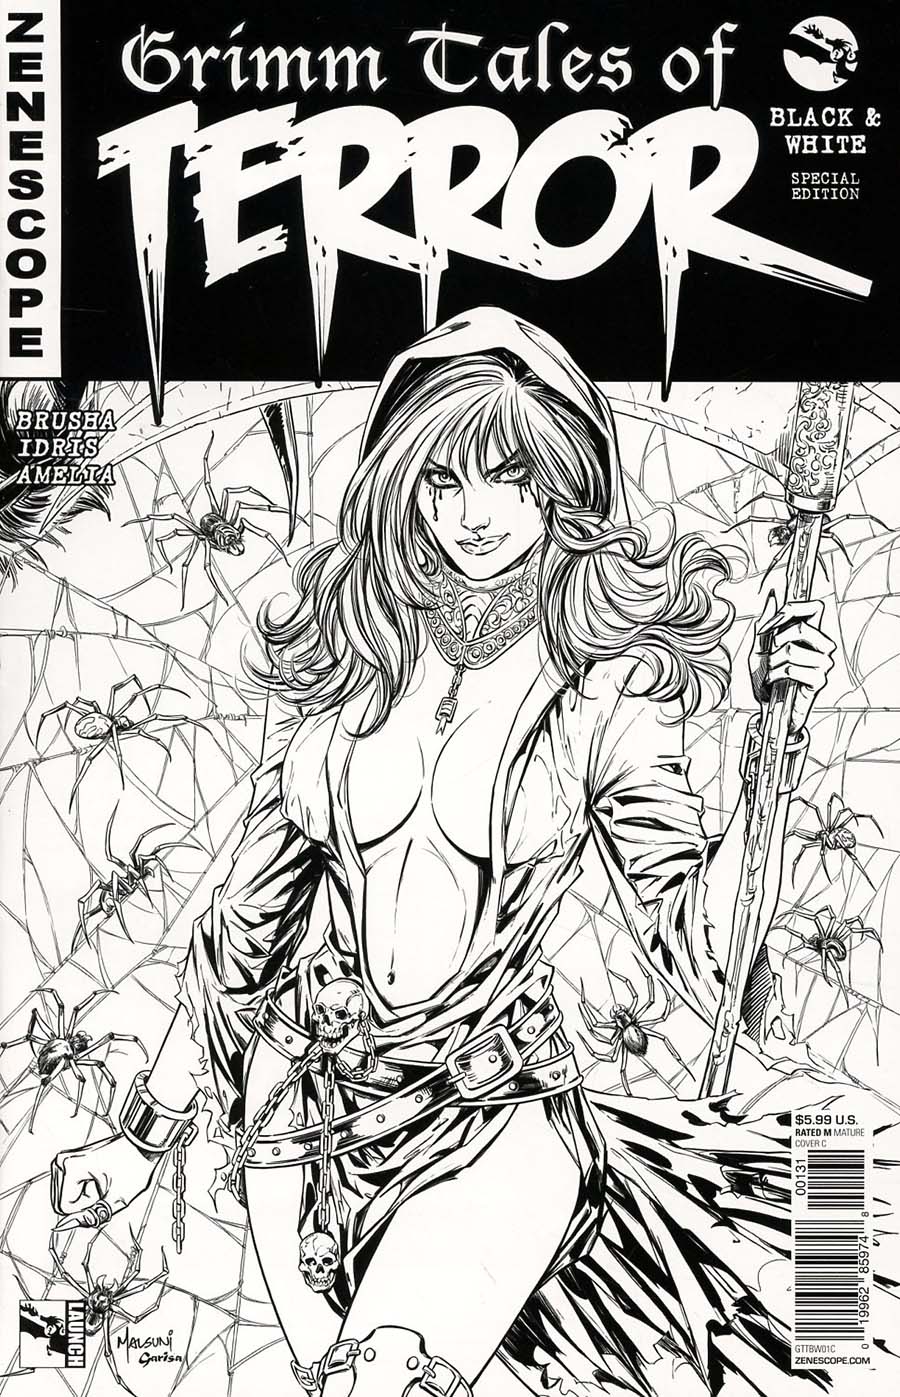 Grimm Fairy Tales Presents Grimm Tales Of Terror 2017 Black & White Special Edition #1 Cover C Abhishek Malsuni